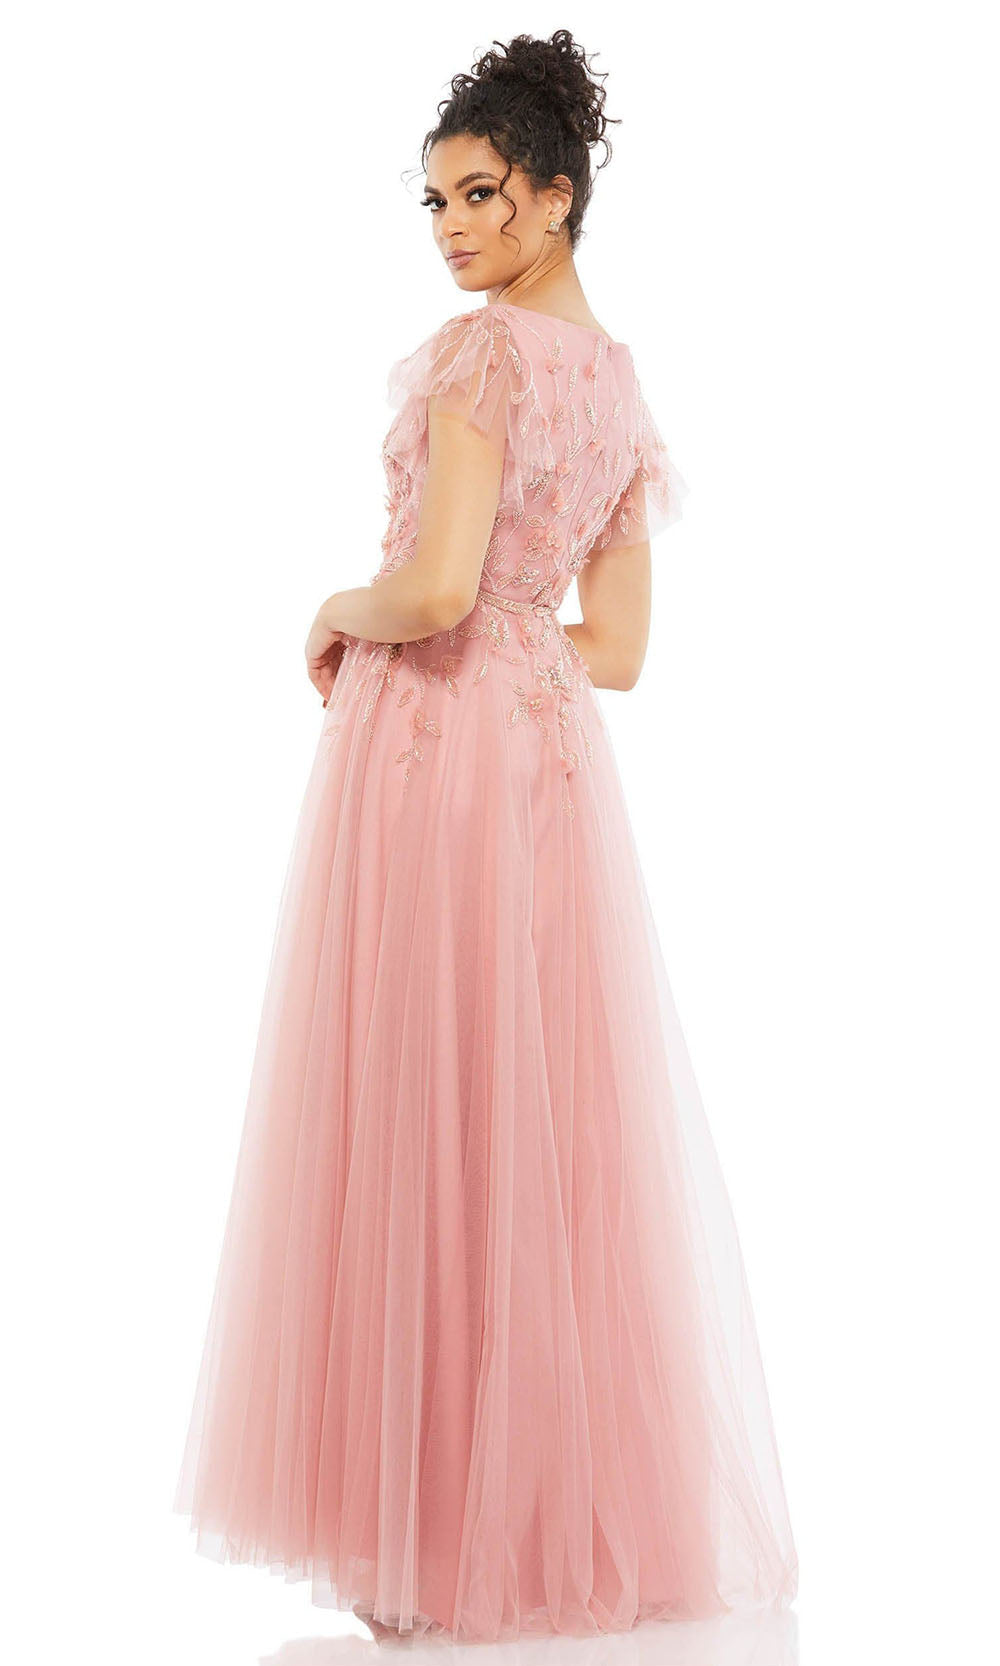 Mac Duggal - 11224 Deep V-Neck Lace Appliqued Gown In Pink